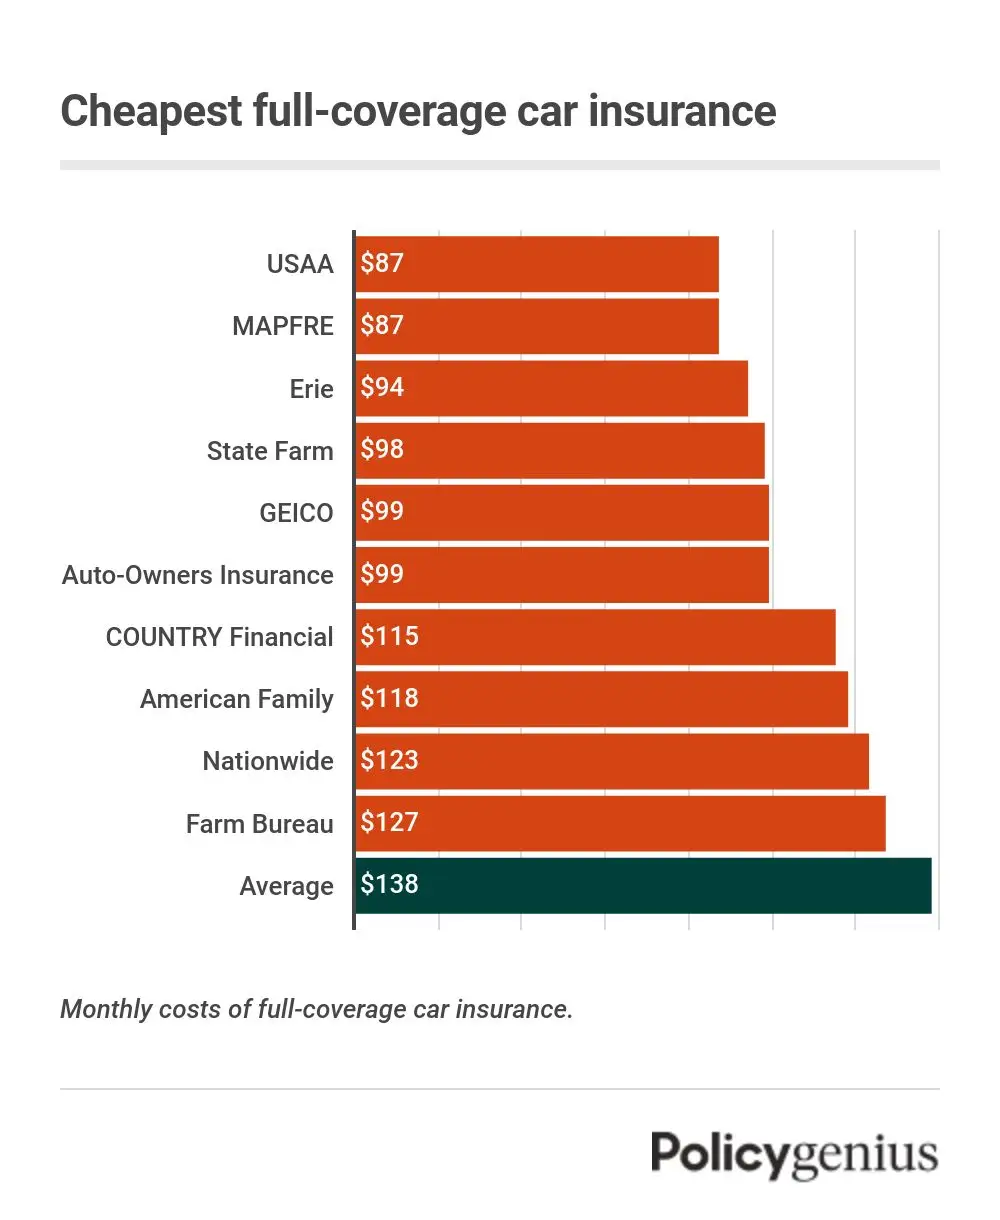 A graph showing the cheapest companies for full-coverage